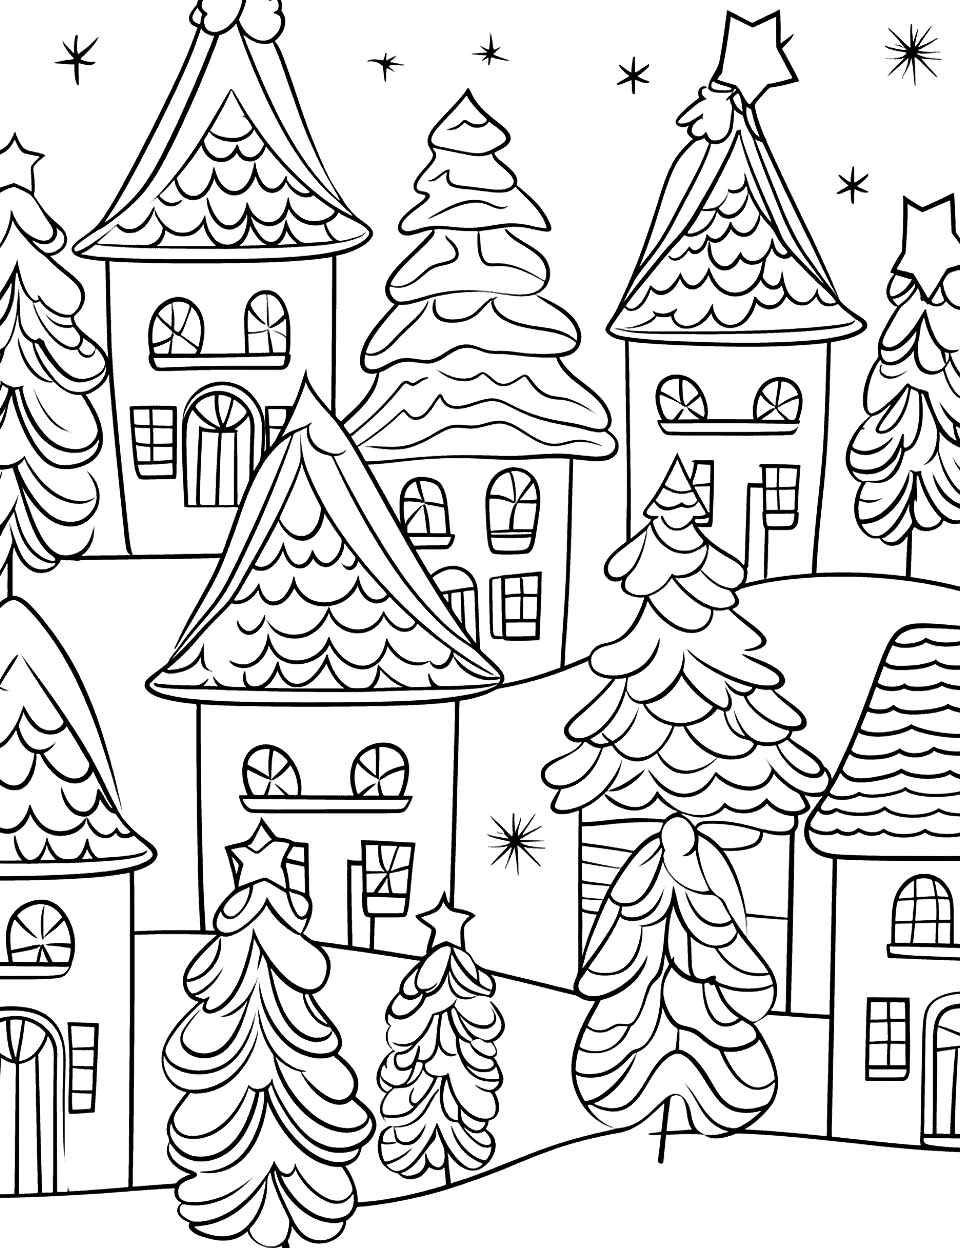 Snowy Christmas Day Coloring Page - A street lined with houses with Christmas decorations on a snowy day